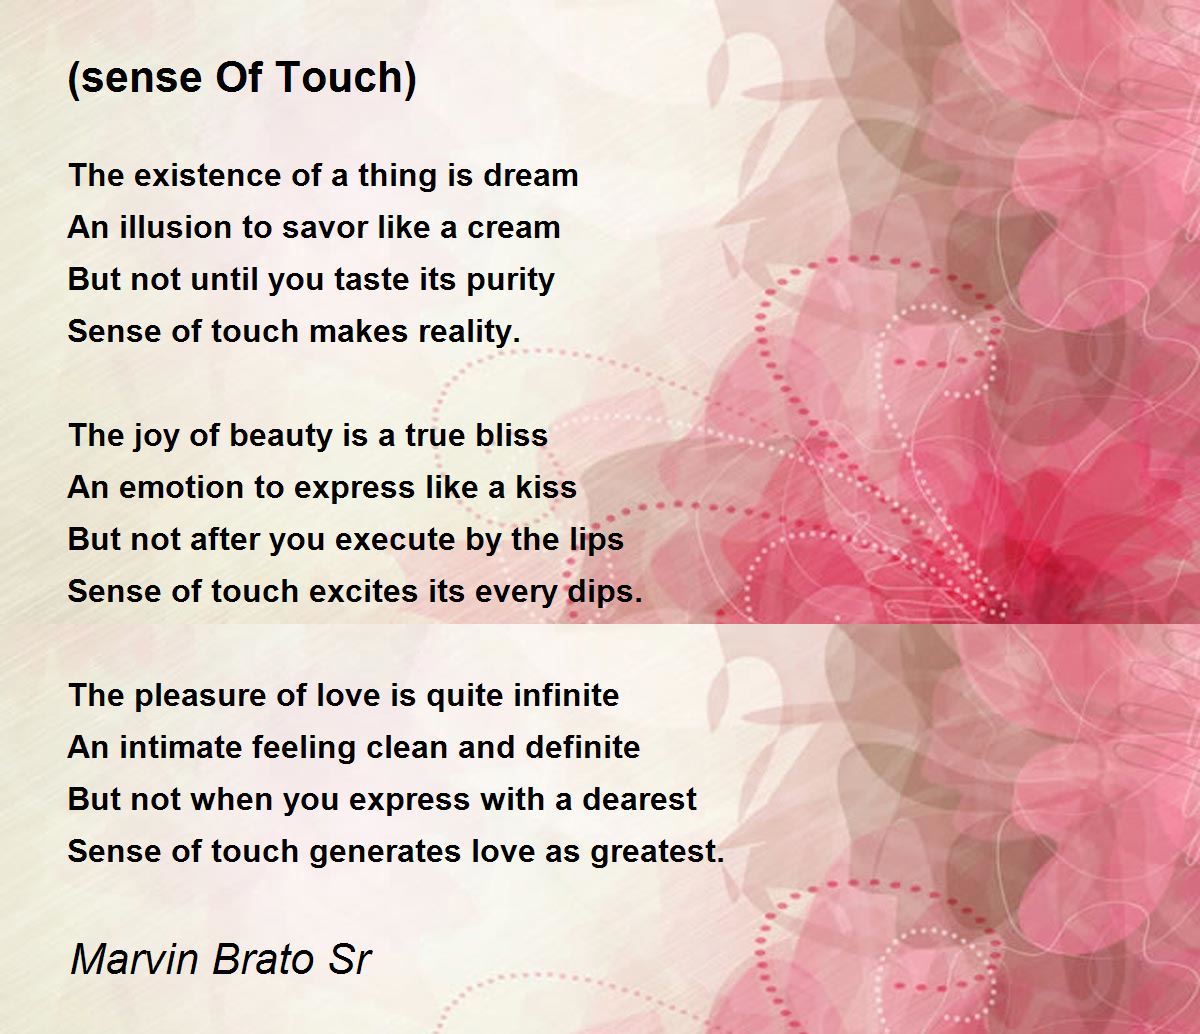 sense Of Touch) - (sense Of Touch) Poem by Marvin Brato Sr